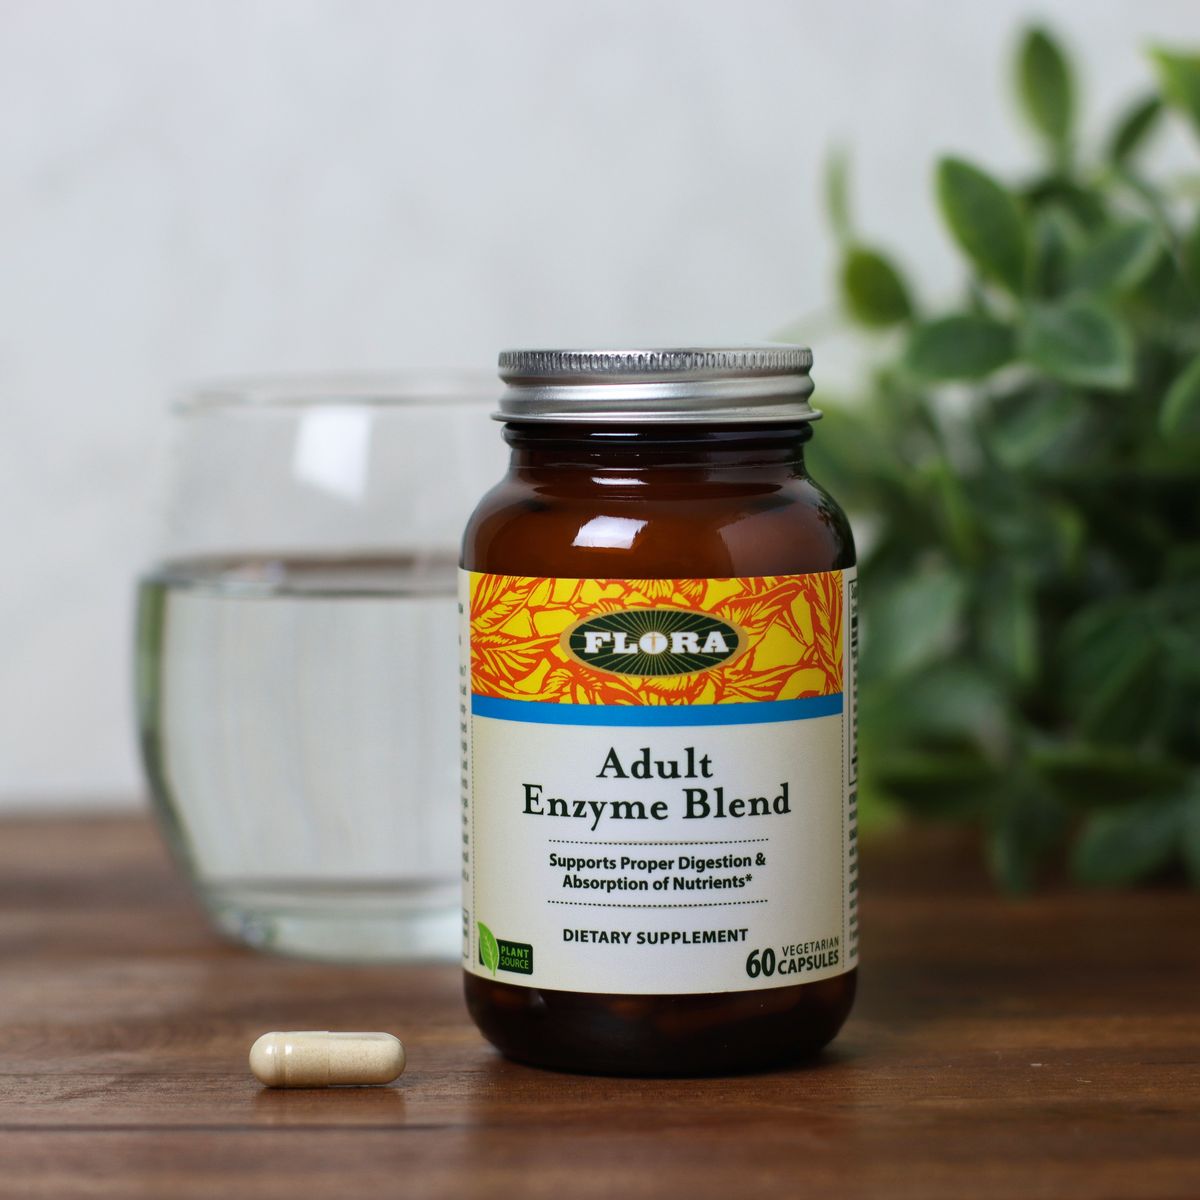 A bottle and capsule of Advanced Adult Enzyme Blend digestive enzymes from Flora